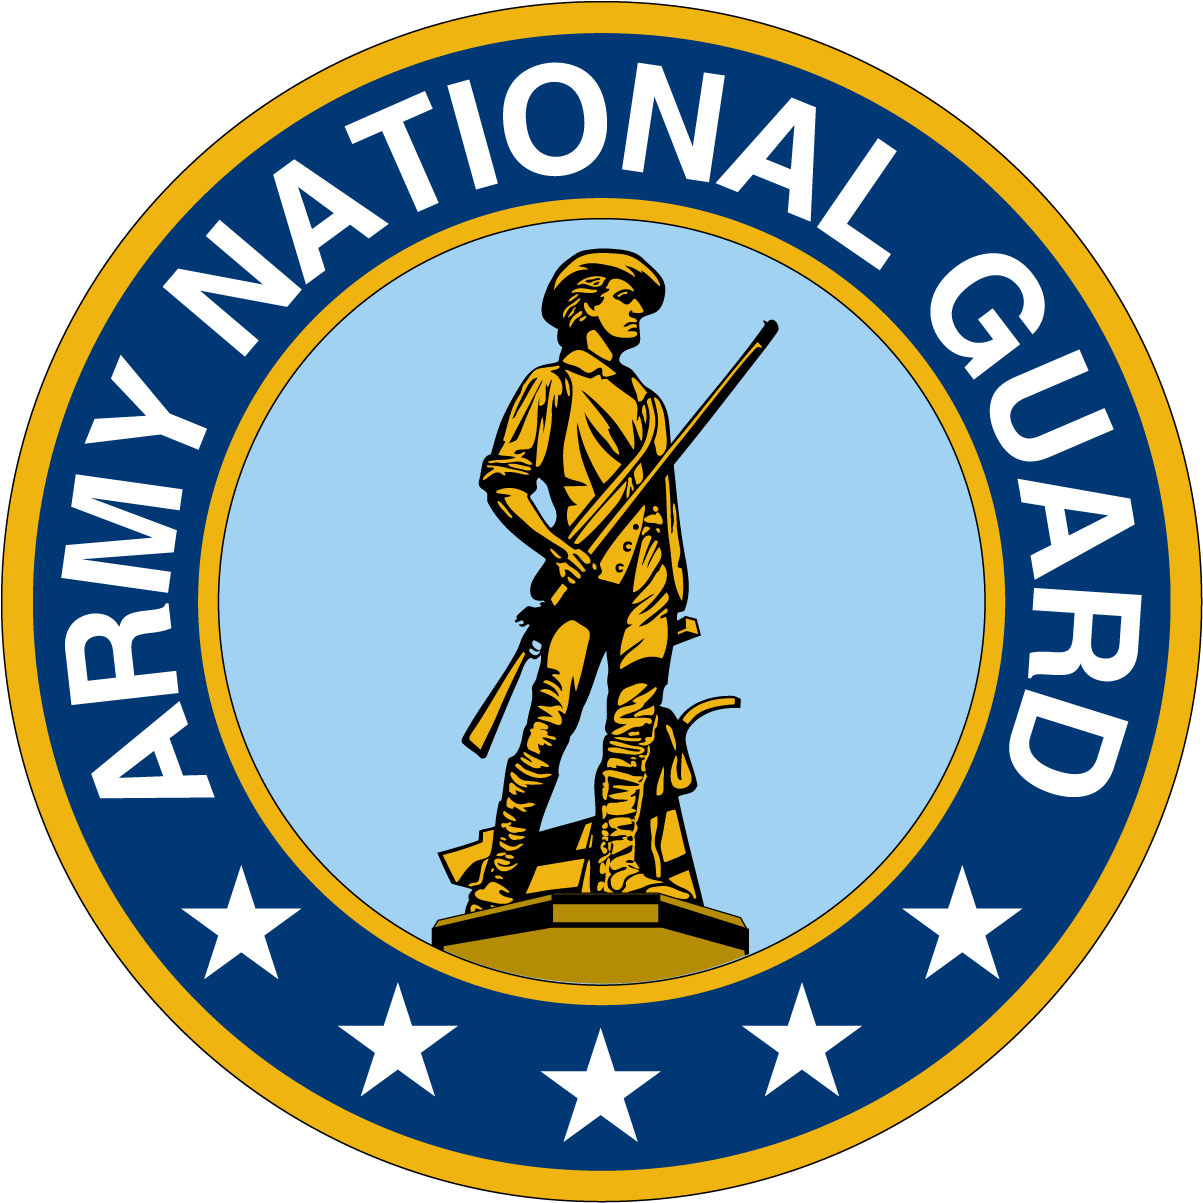 Army National Guard logo.gif - ClipArt Best - ClipArt Best